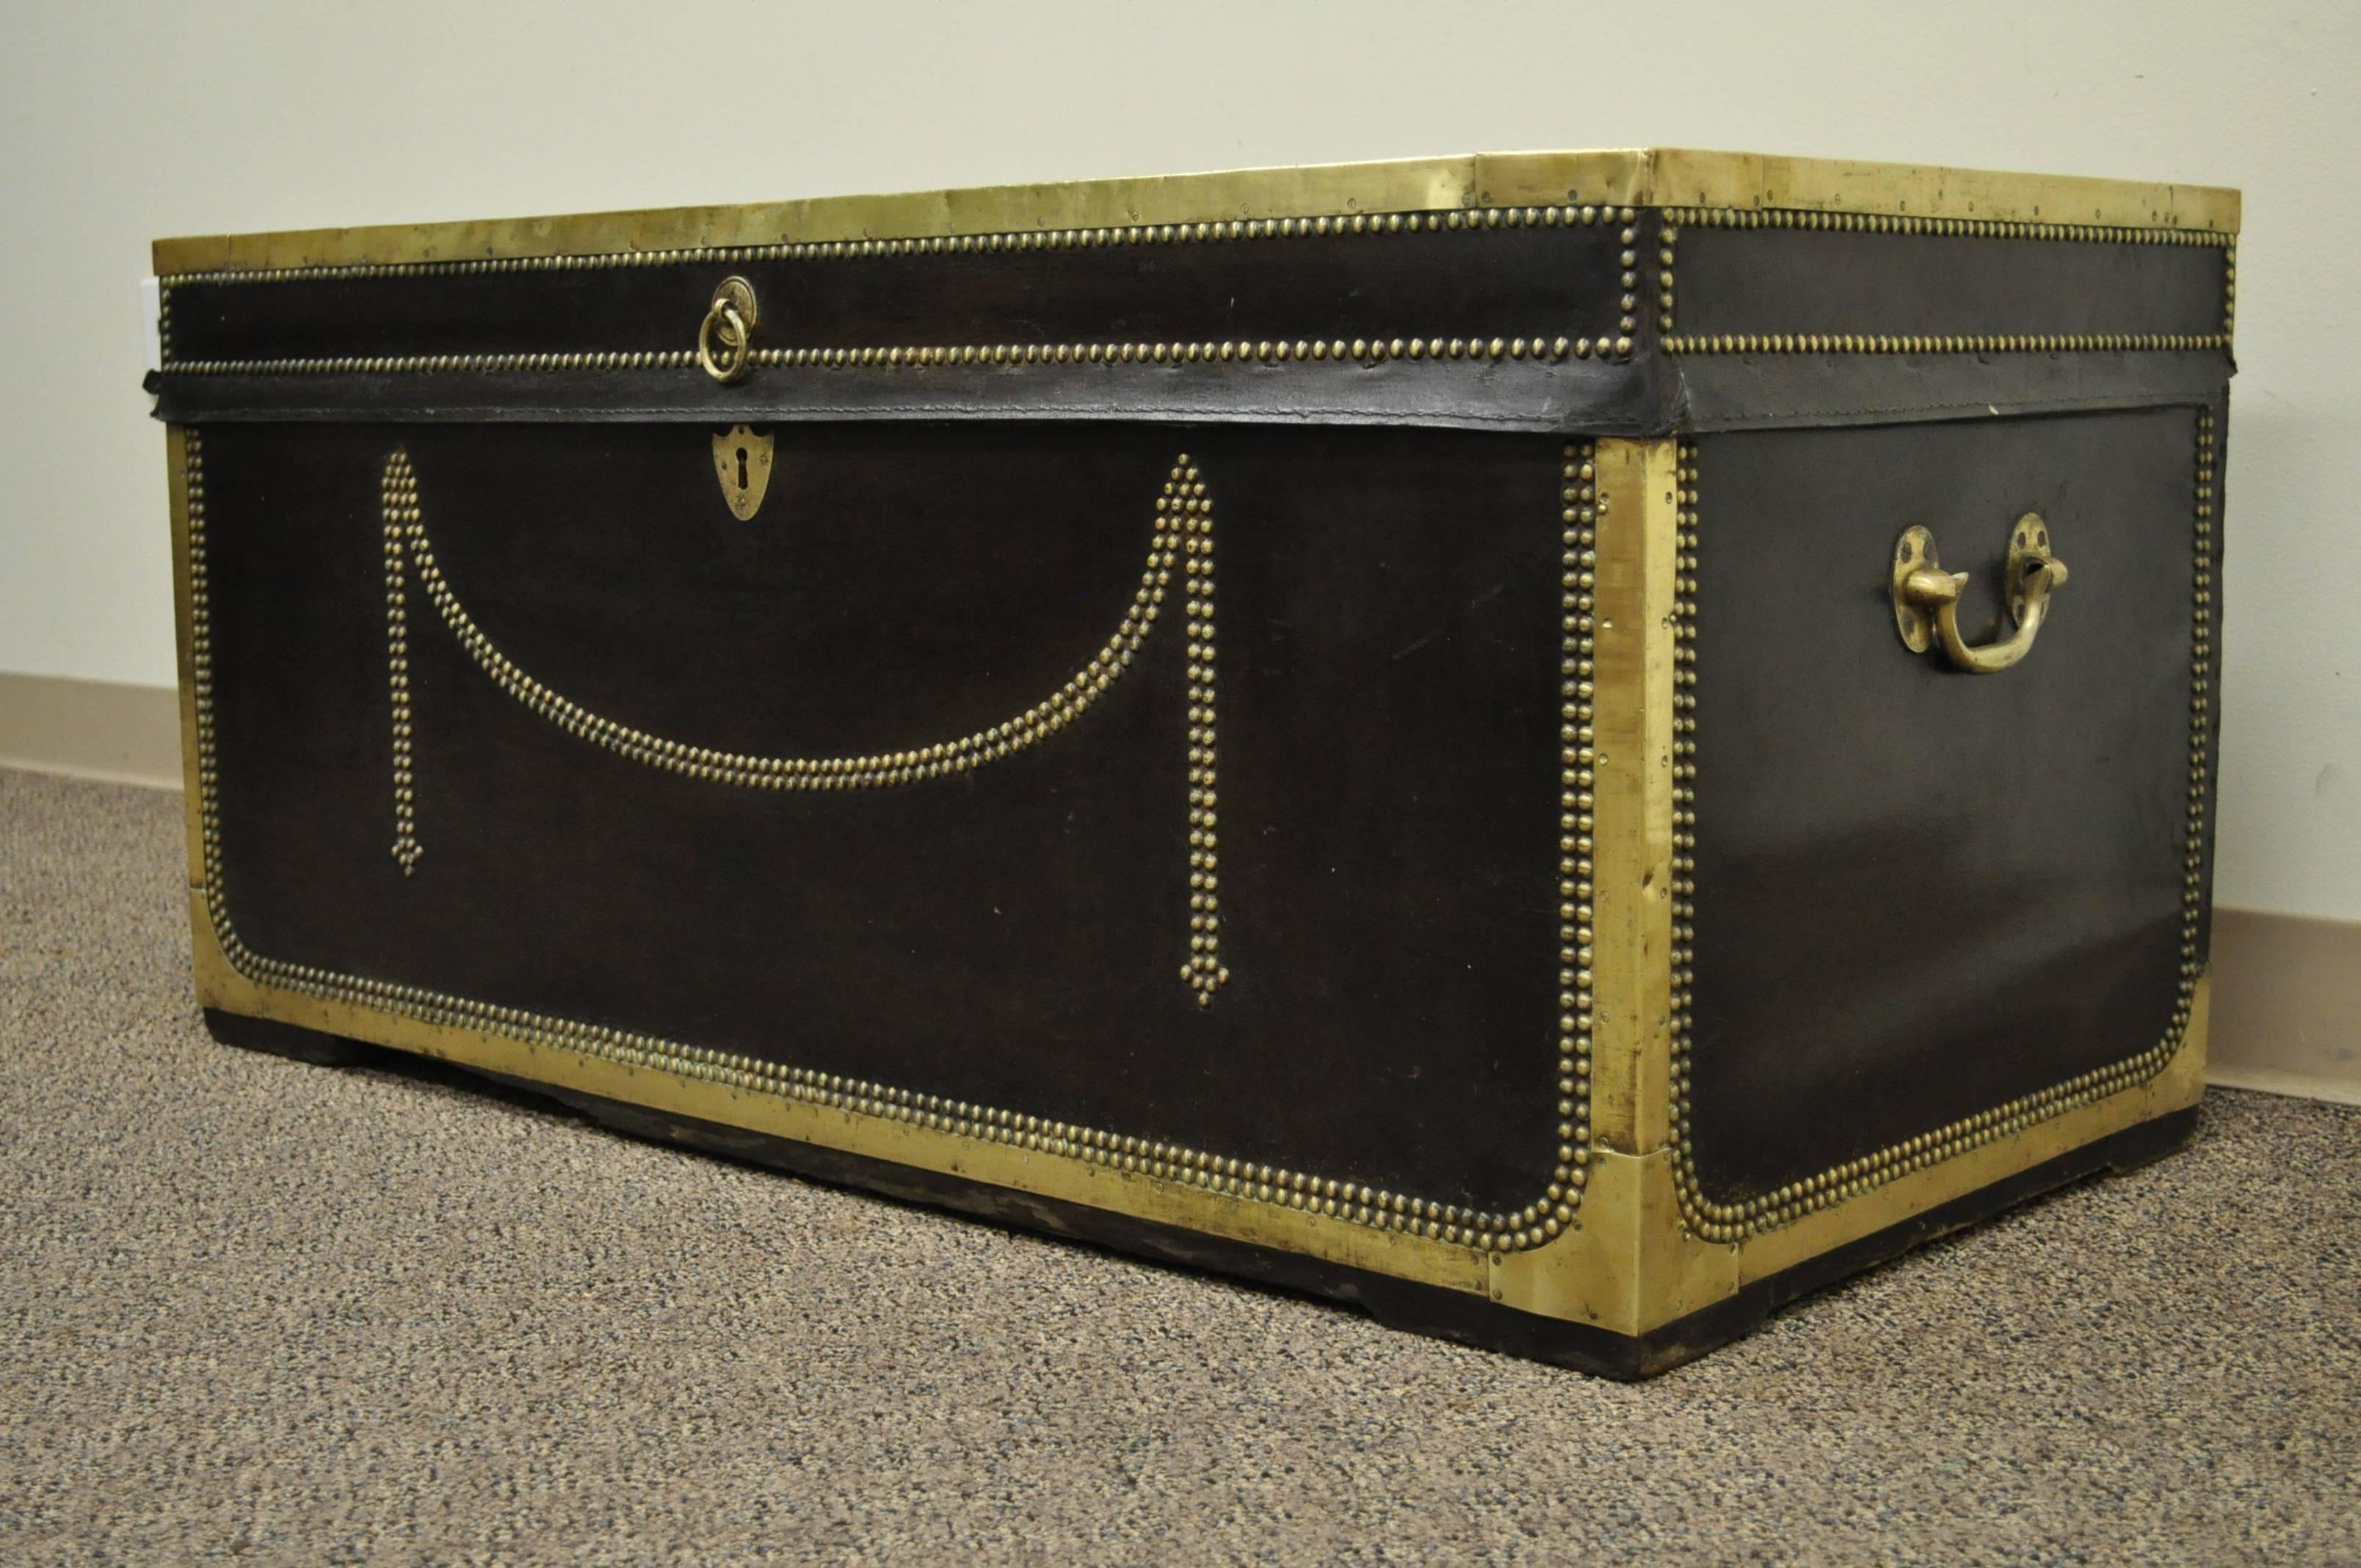 19th century handmade leather and brass-clad trunk over camphor wood. Item features strips of brass trim as well as decorative brass nailheads adorning the chest. Would work wonderful as a coffee table or decorative object in any setting.